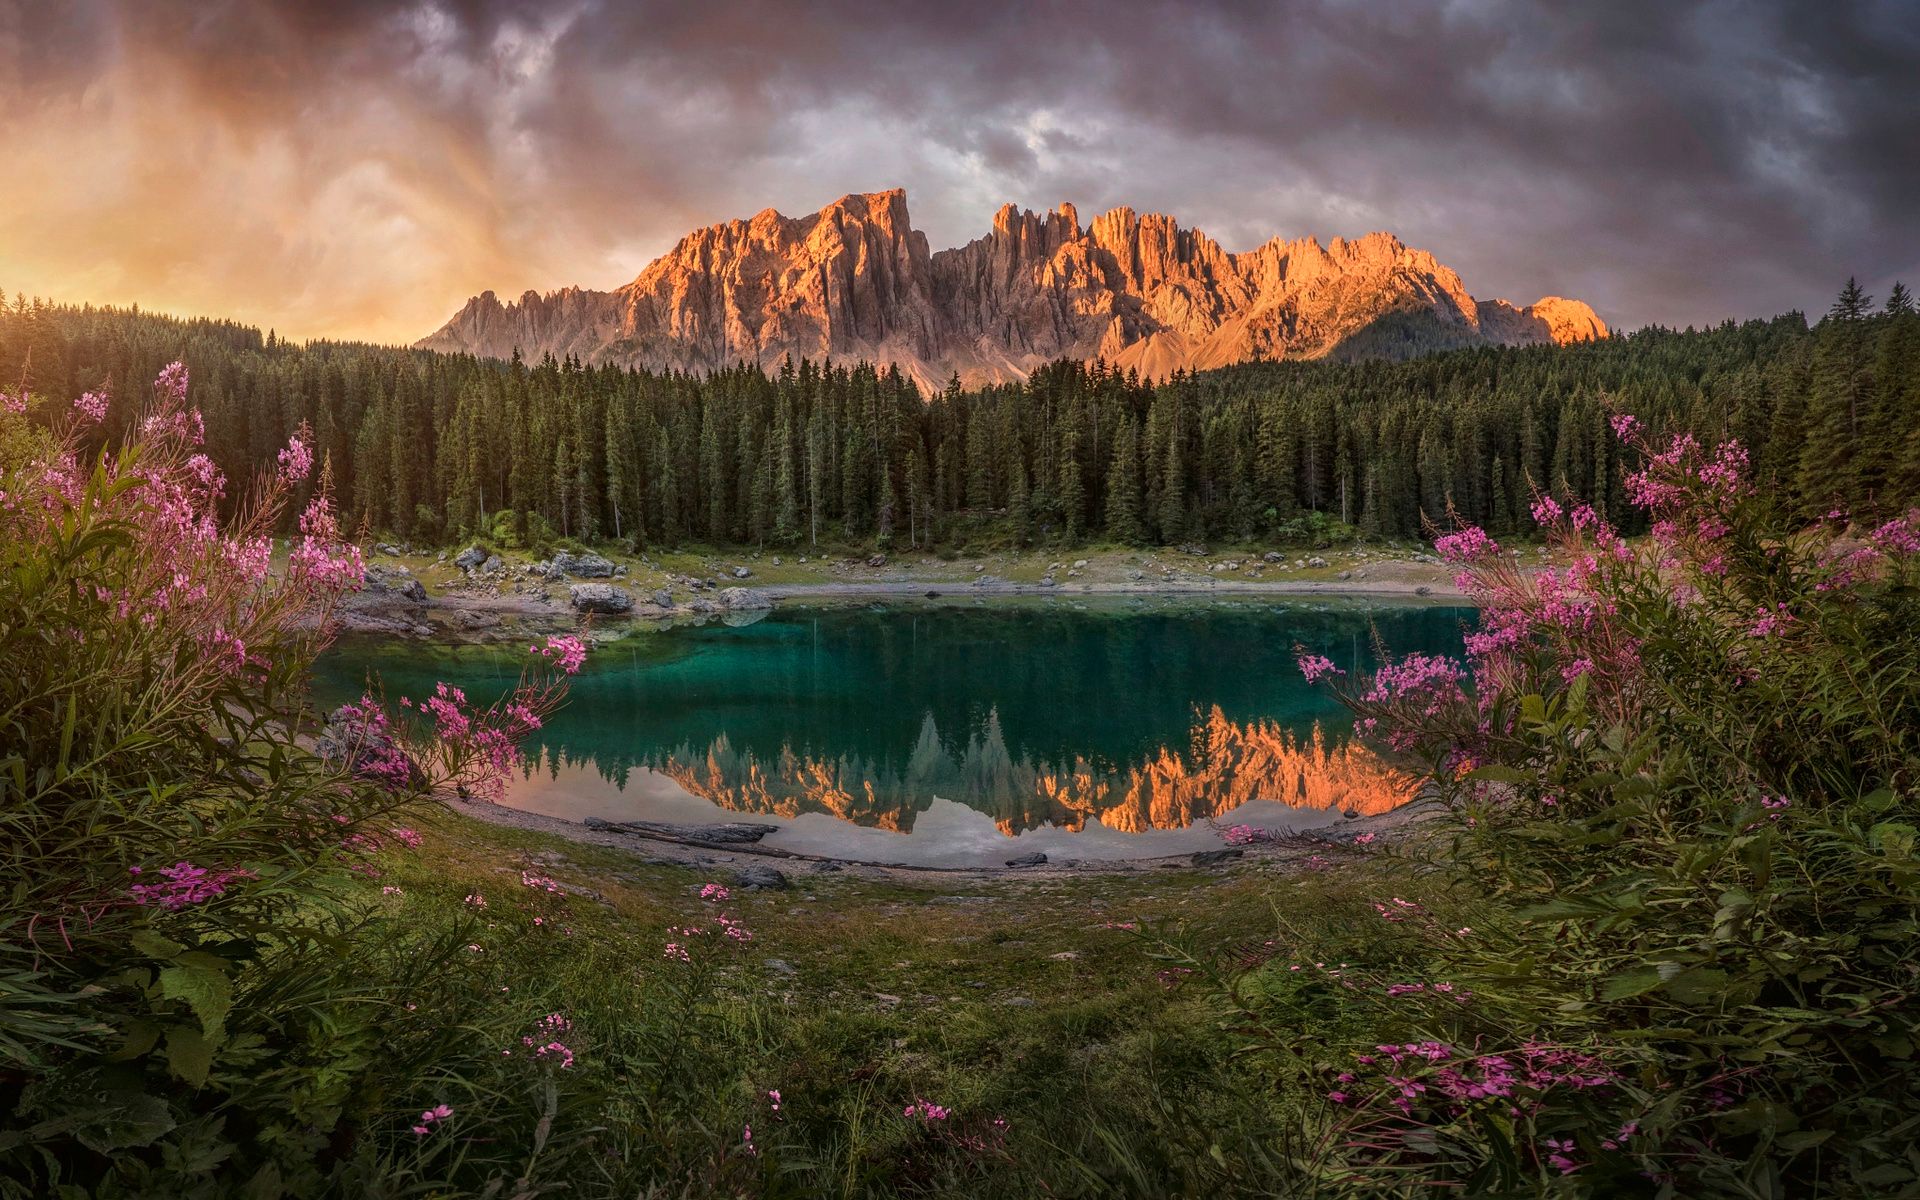 Sunset Lake Carezza Mount Catinaccio Mountains In South Tyrol Europe Italy Dolomites 4k Ultra HD Tv Wallpaper For Desktop Mobile Phones, Wallpaper13.com